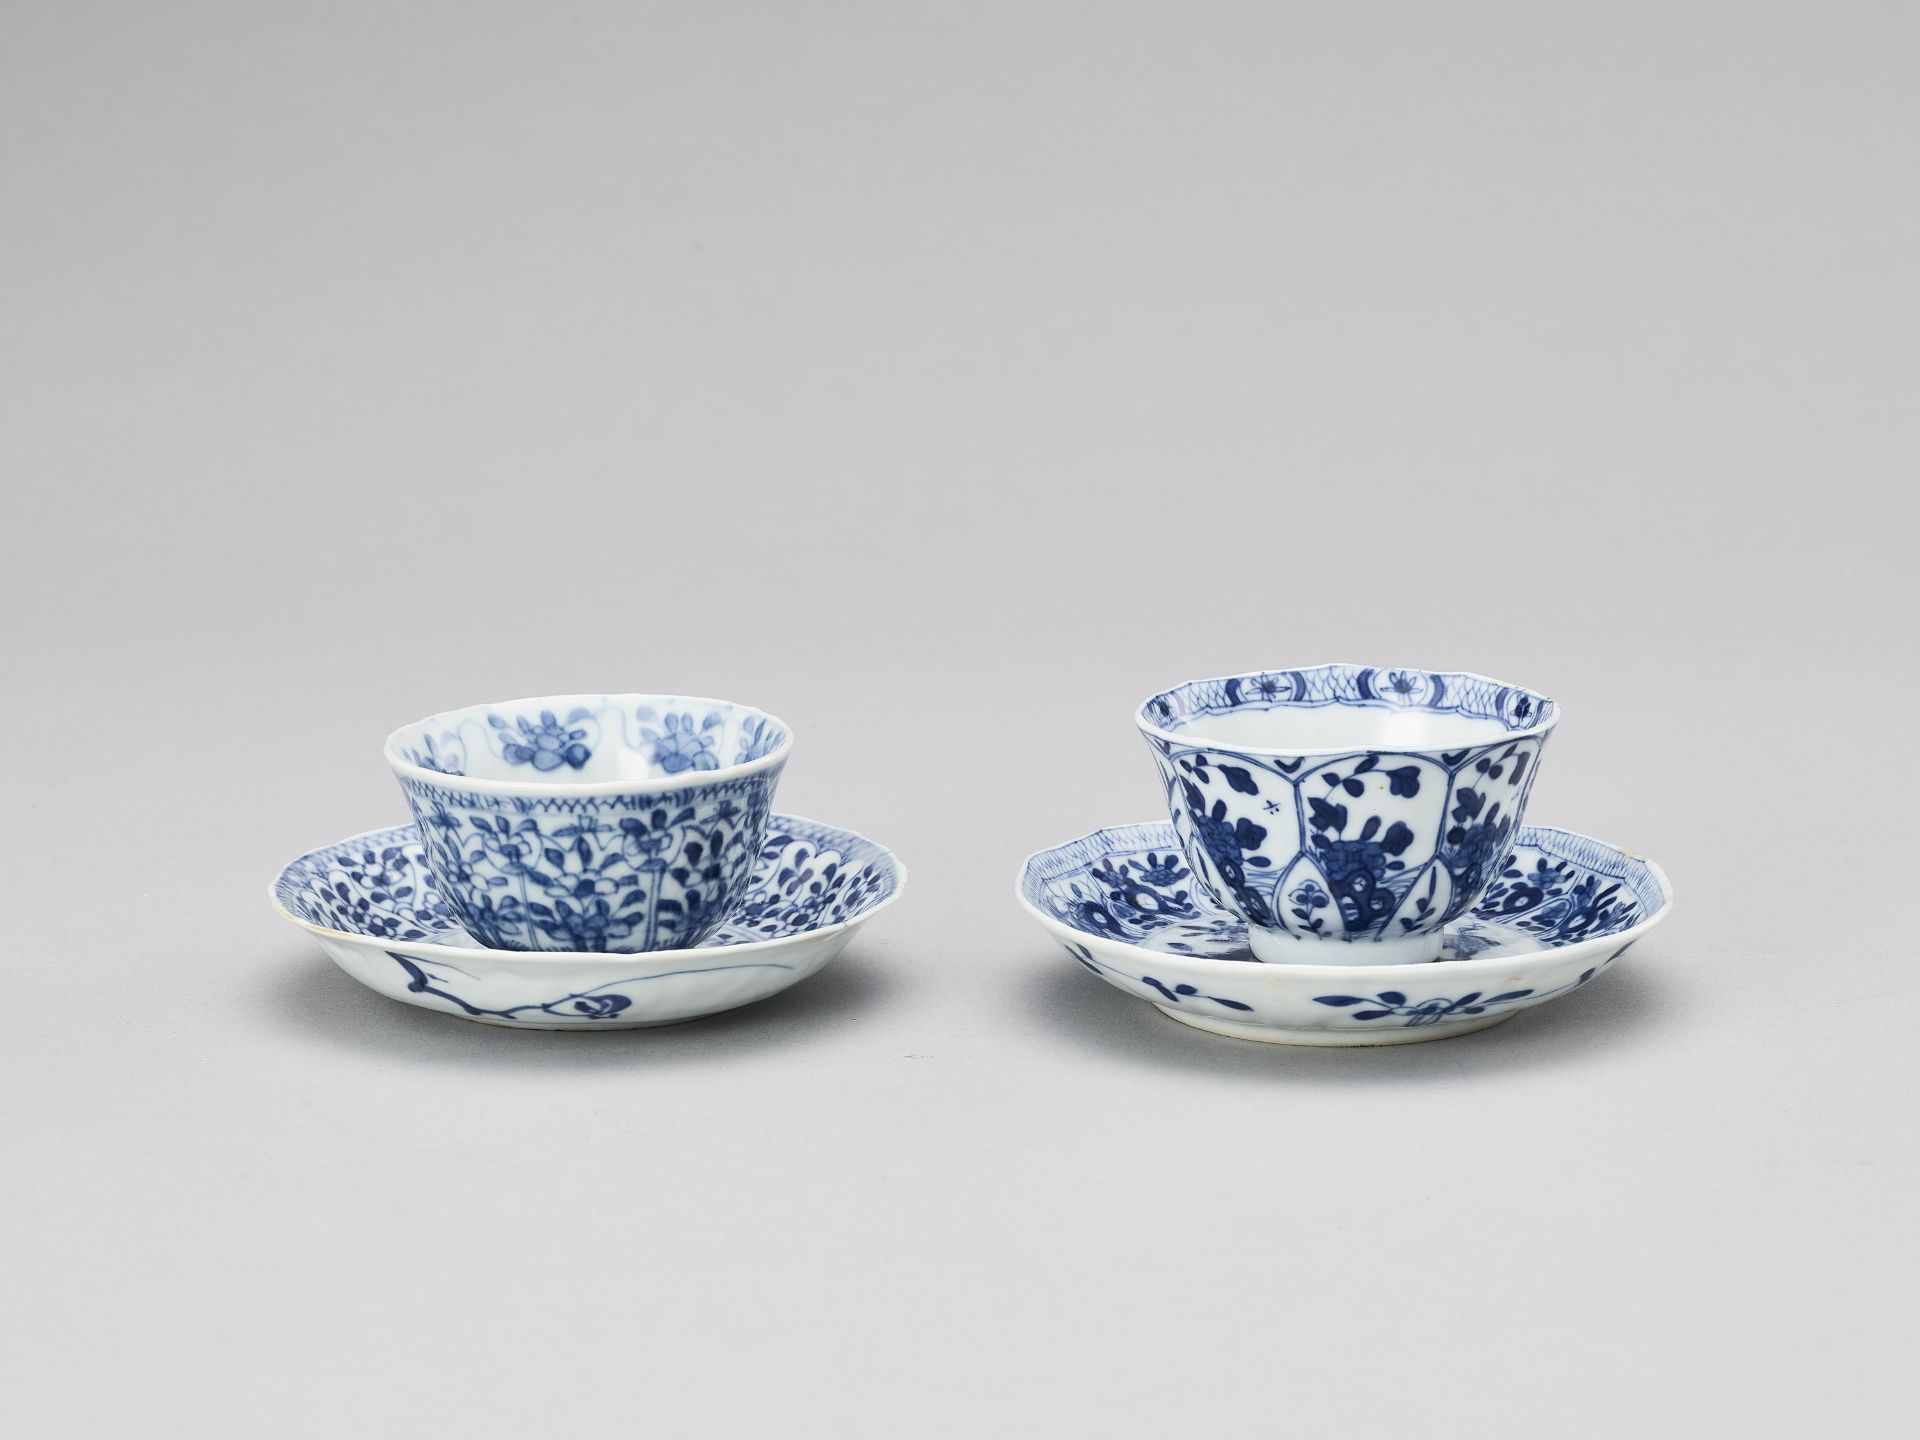 A PAIR OF BLUE AND WHITE PORCELAIN CUPS WITH MATCHING PLATES, KANGXI